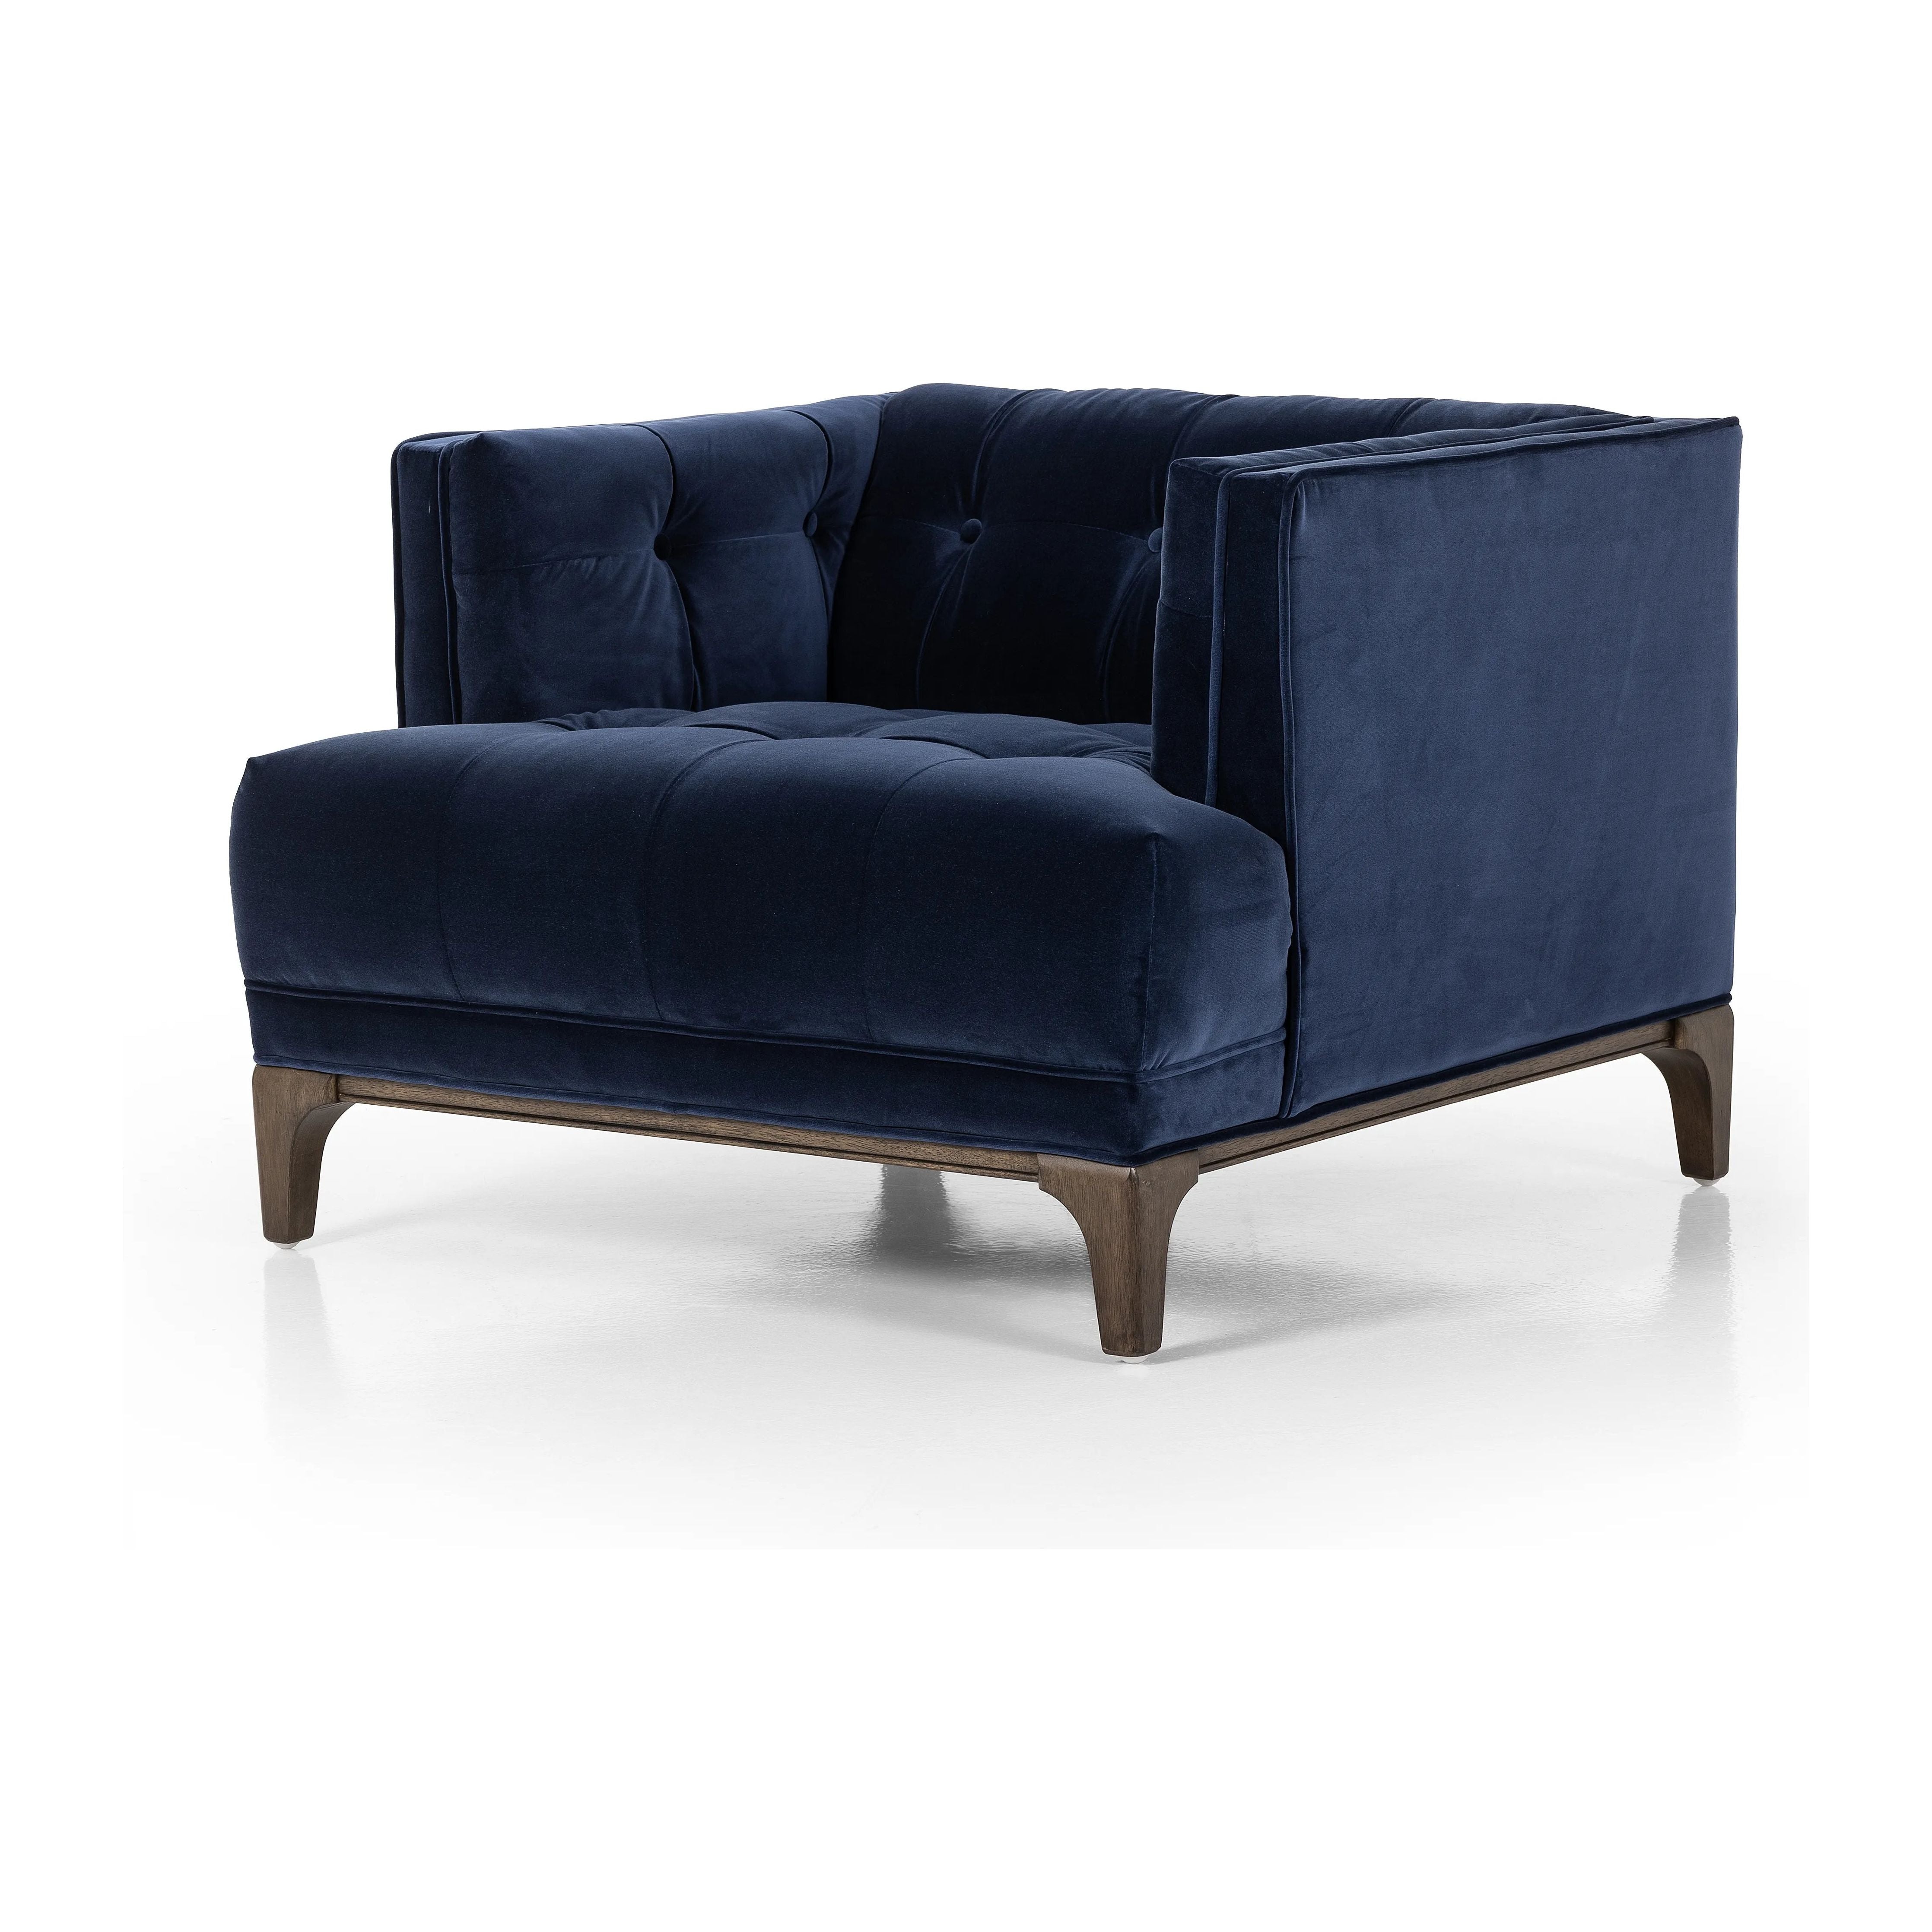 This low, tailored midcentury silhouette is upholstered in a velvety navy fabric, with dramatic blind tufting for texture.Collection: Kensingto Amethyst Home provides interior design, new home construction design consulting, vintage area rugs, and lighting in the Nashville metro area.